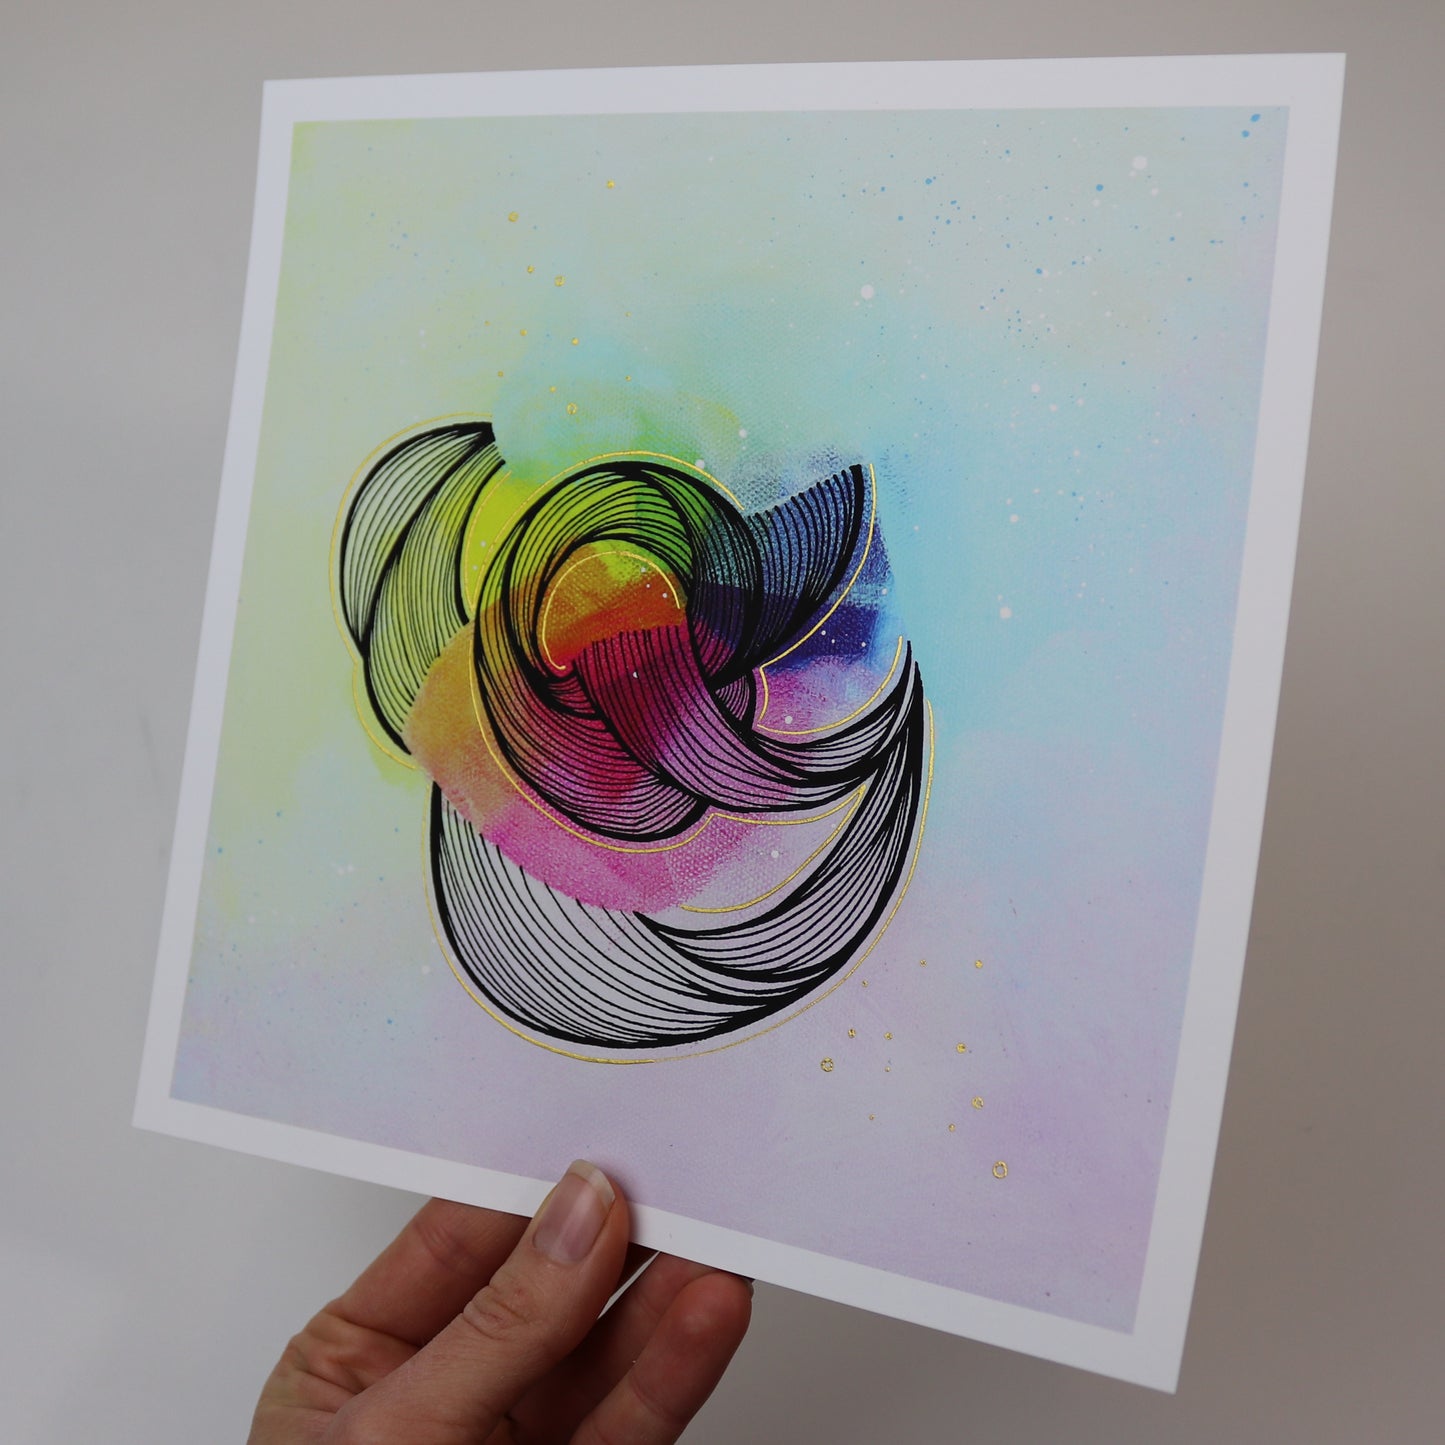 Open Edition Print: "Rainbow Coiling I" Hand Embellished